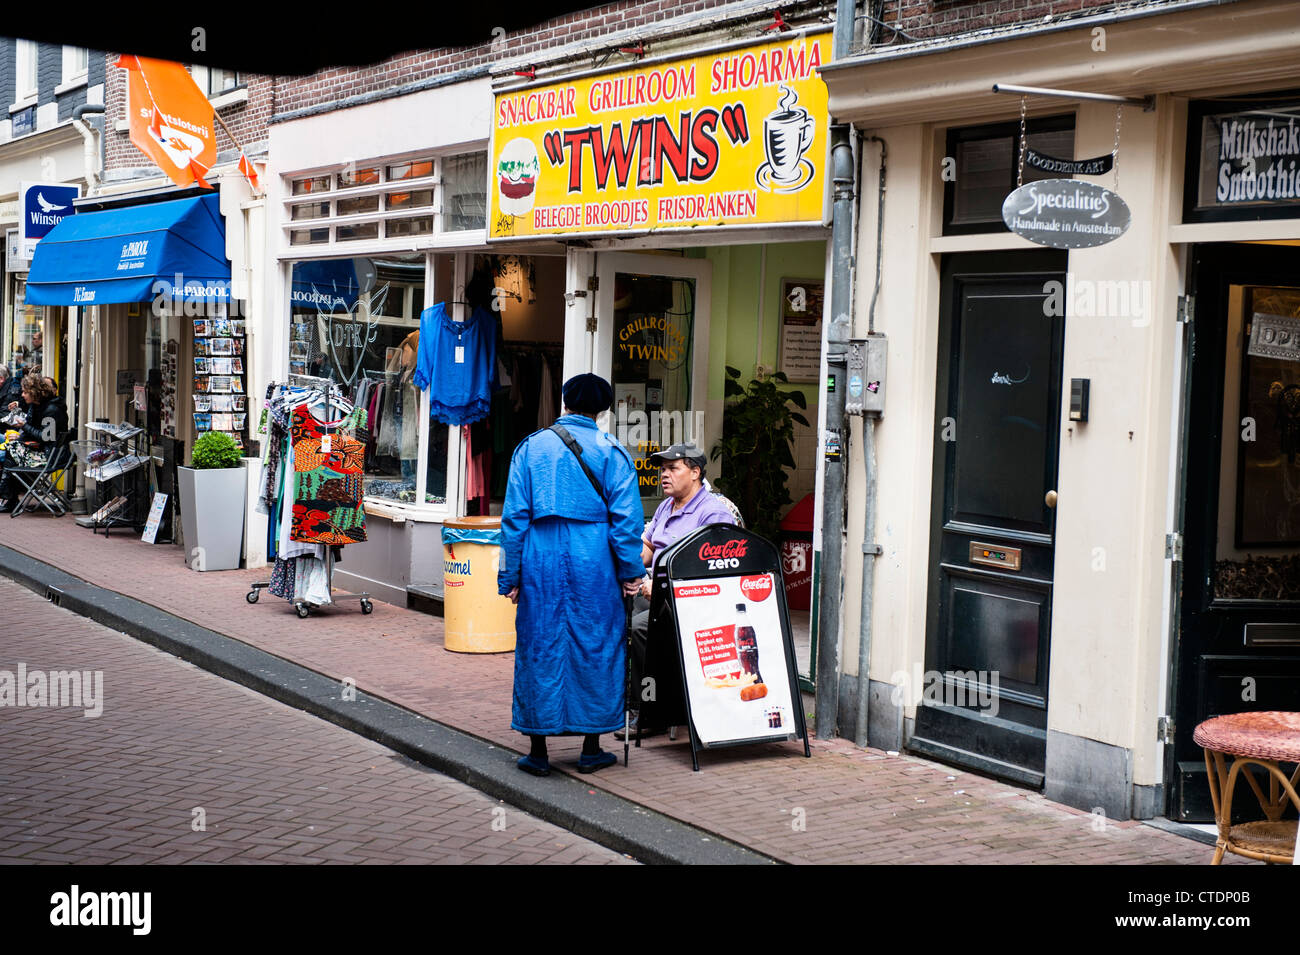 Normal street scenes in the Jordaan neighbourhood of Amsterdam. lady in  blue in front of the snackbar, grill room Twins Stock Photo - Alamy